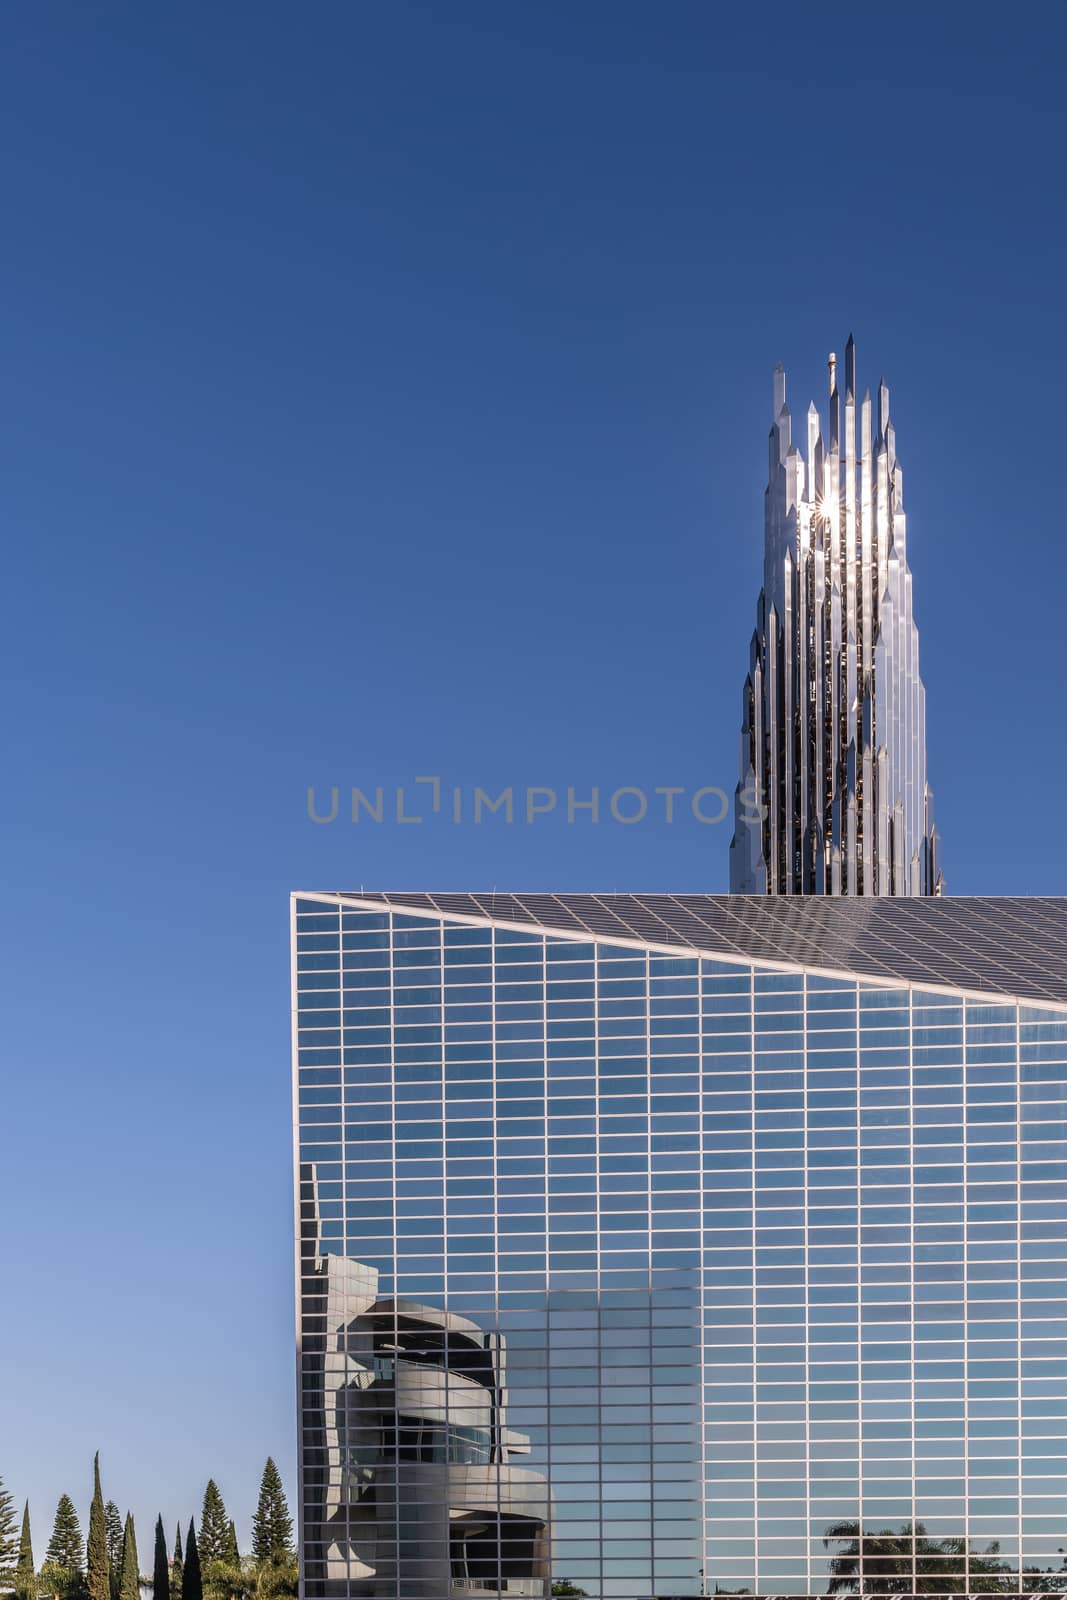 Christ Cathedral and crystal Crean Tower in Garden Grove, Califo by Claudine